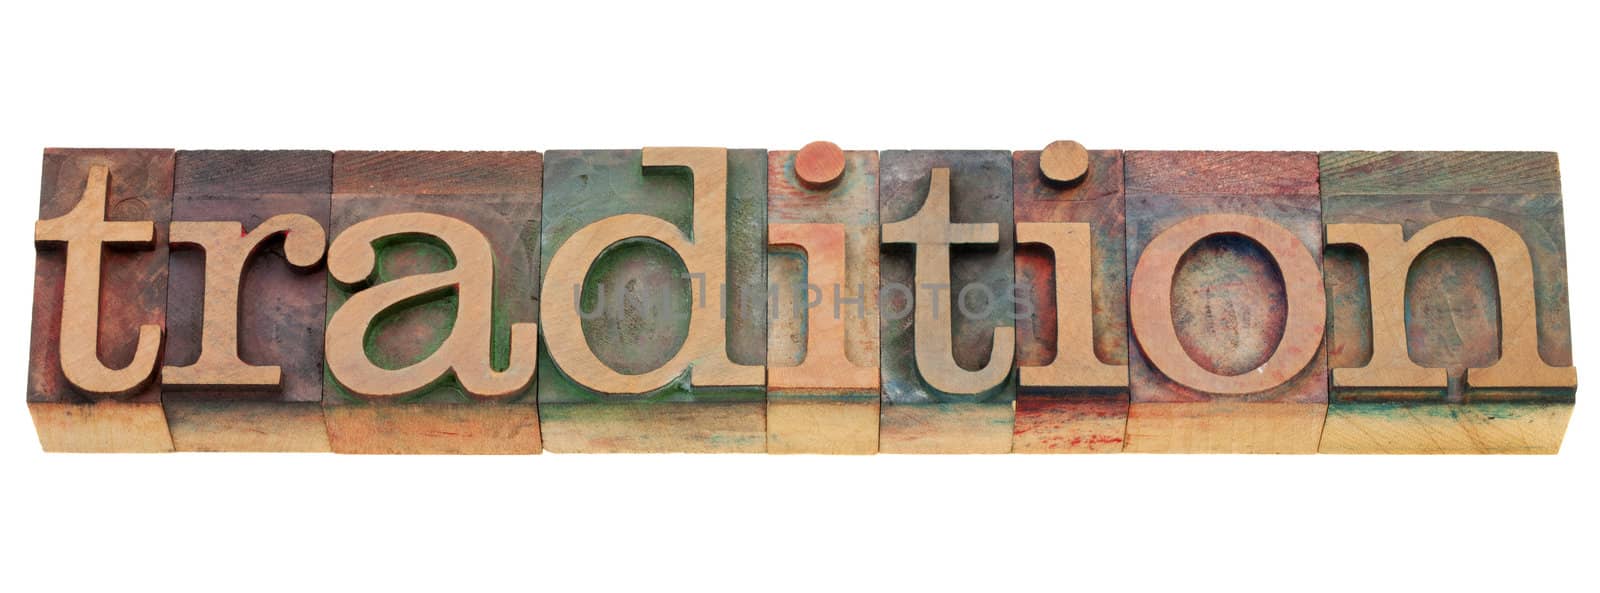 tradition - isolated word in vintage wood letterpress printing blocks